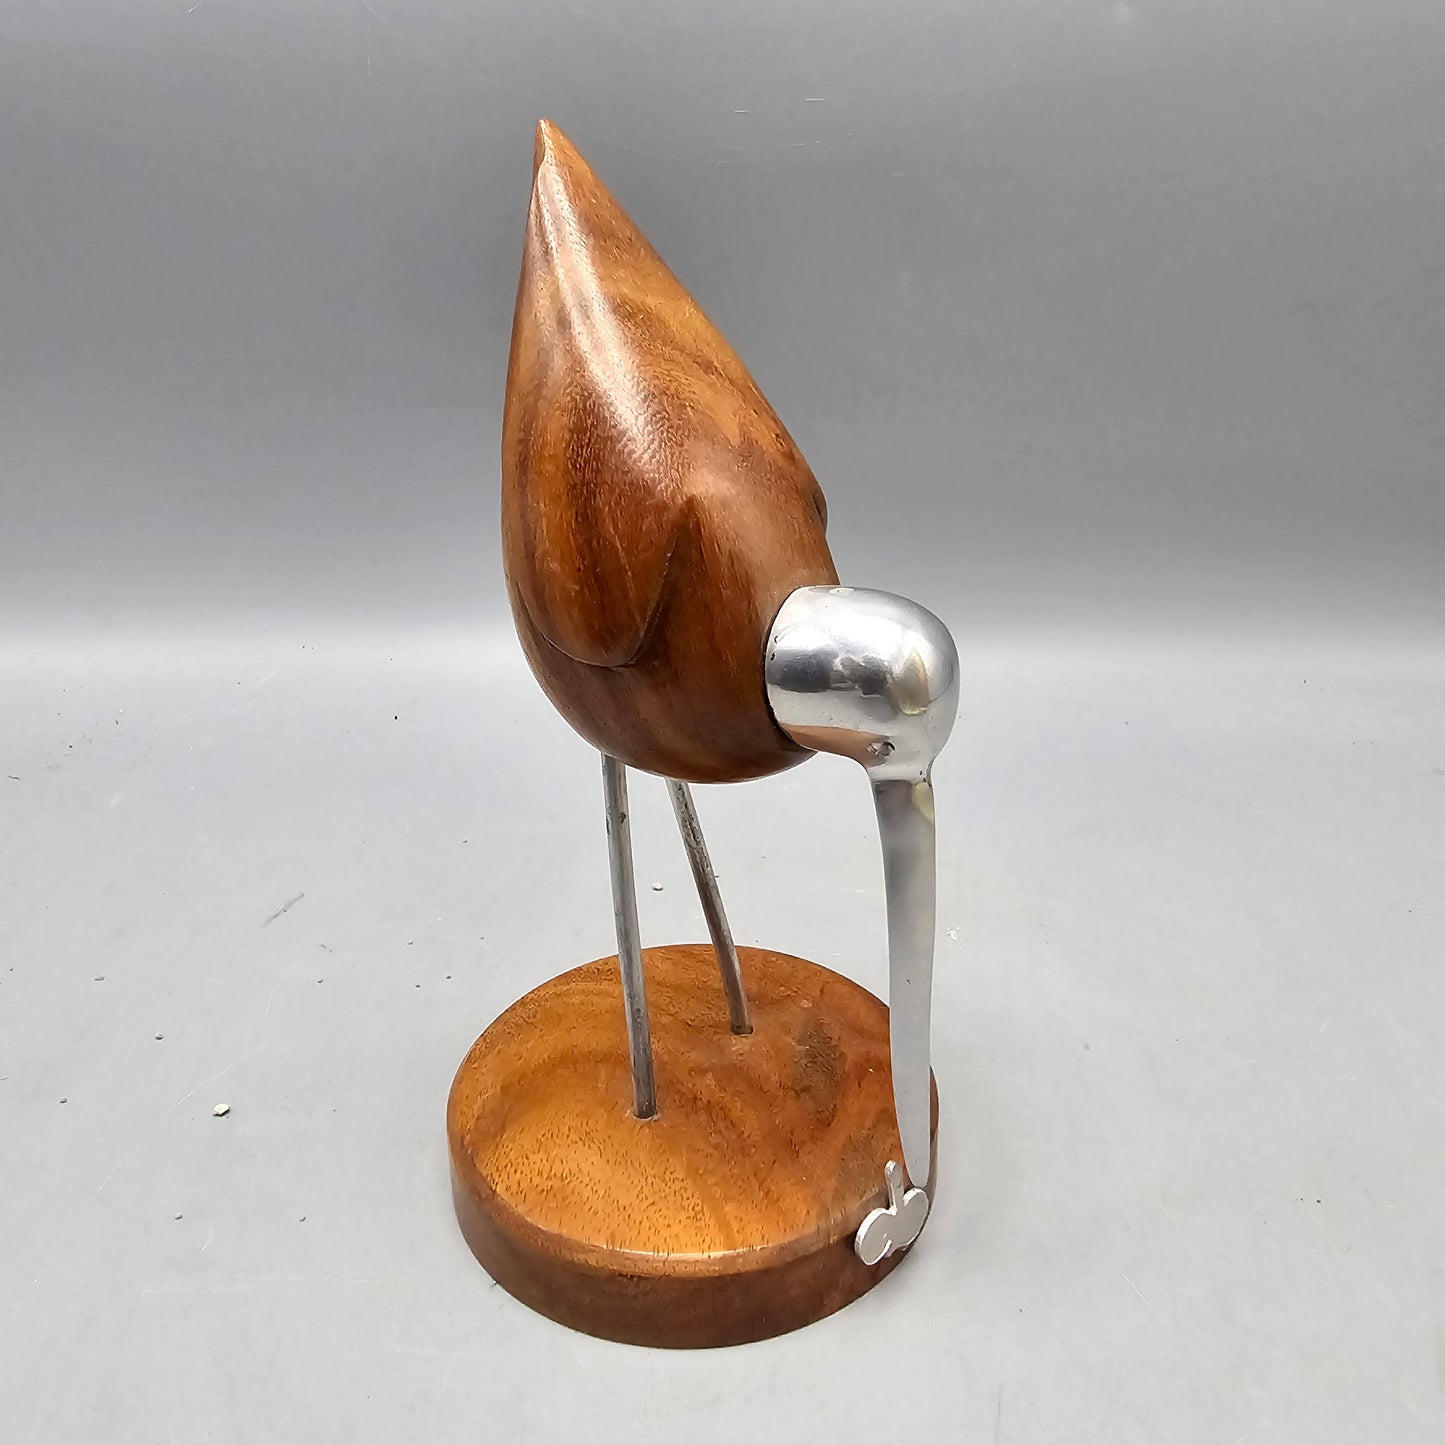 Vintage Shorebird Wood Figurine with Silver Accents